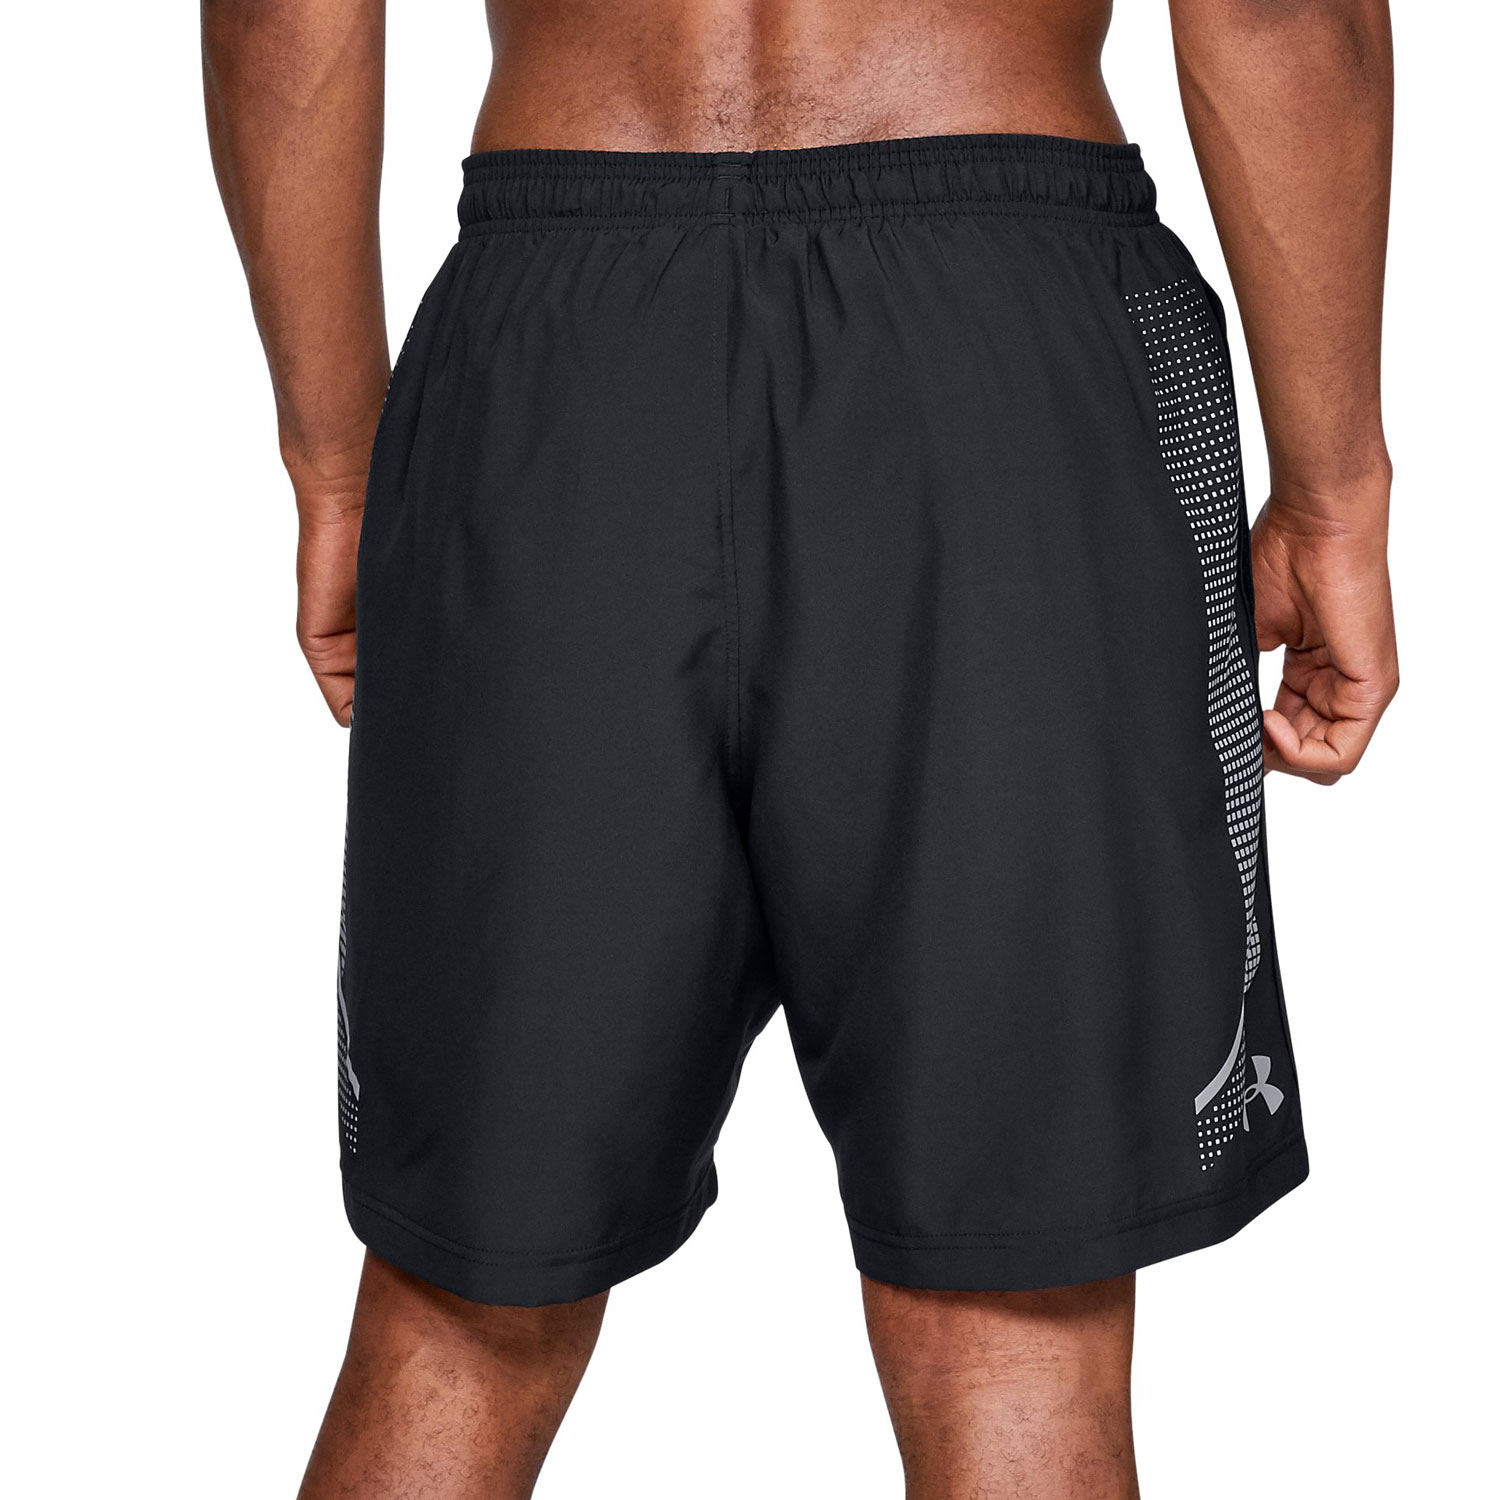 Under Armour Woven Graphic 8in Men's Tennis Shorts - Black/Grey